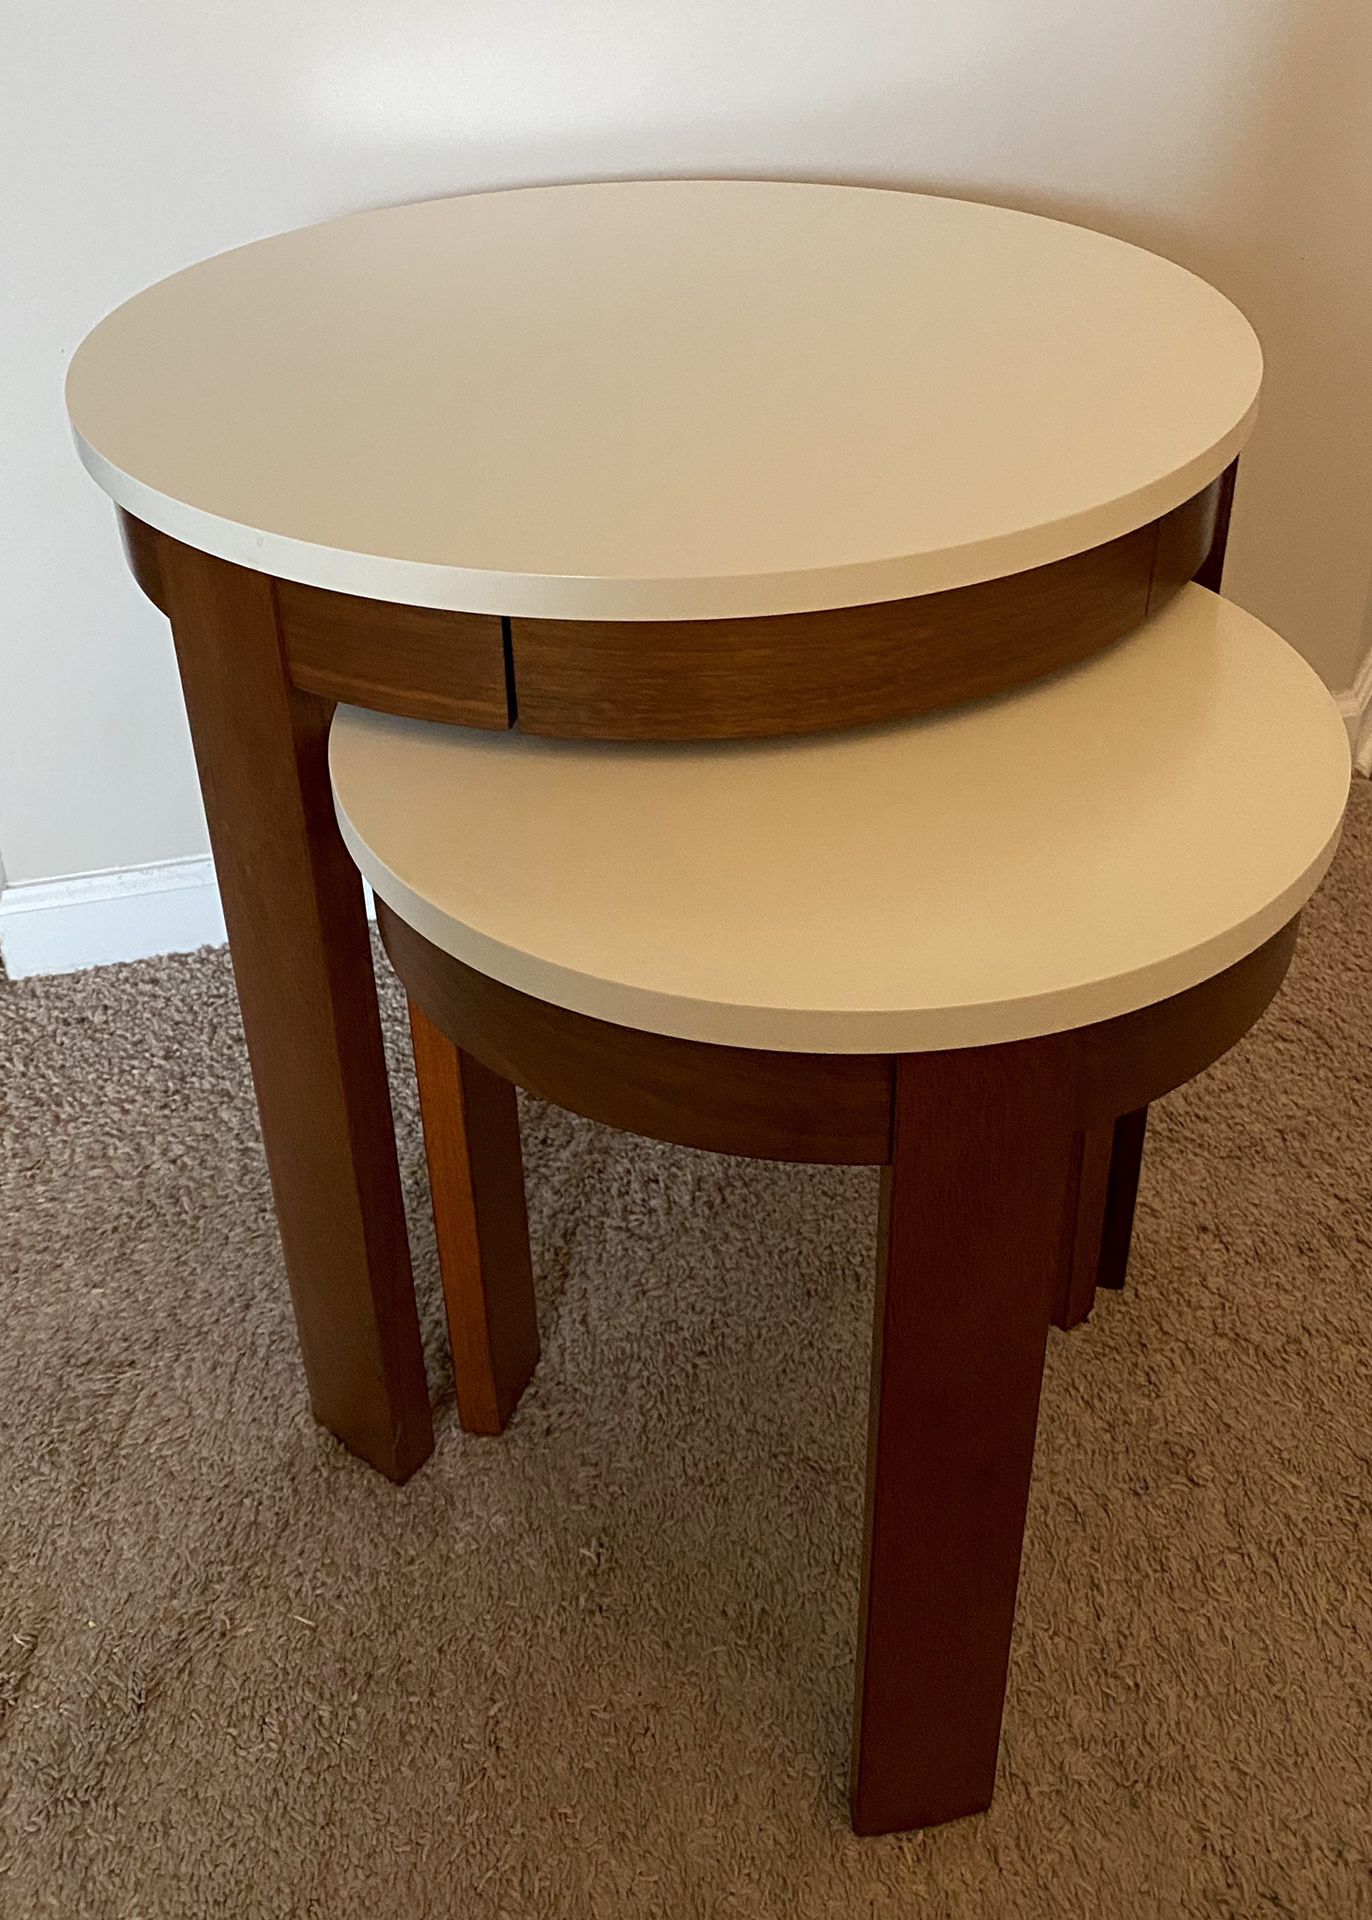 Set of two side/end-tables from Crate&Barrels